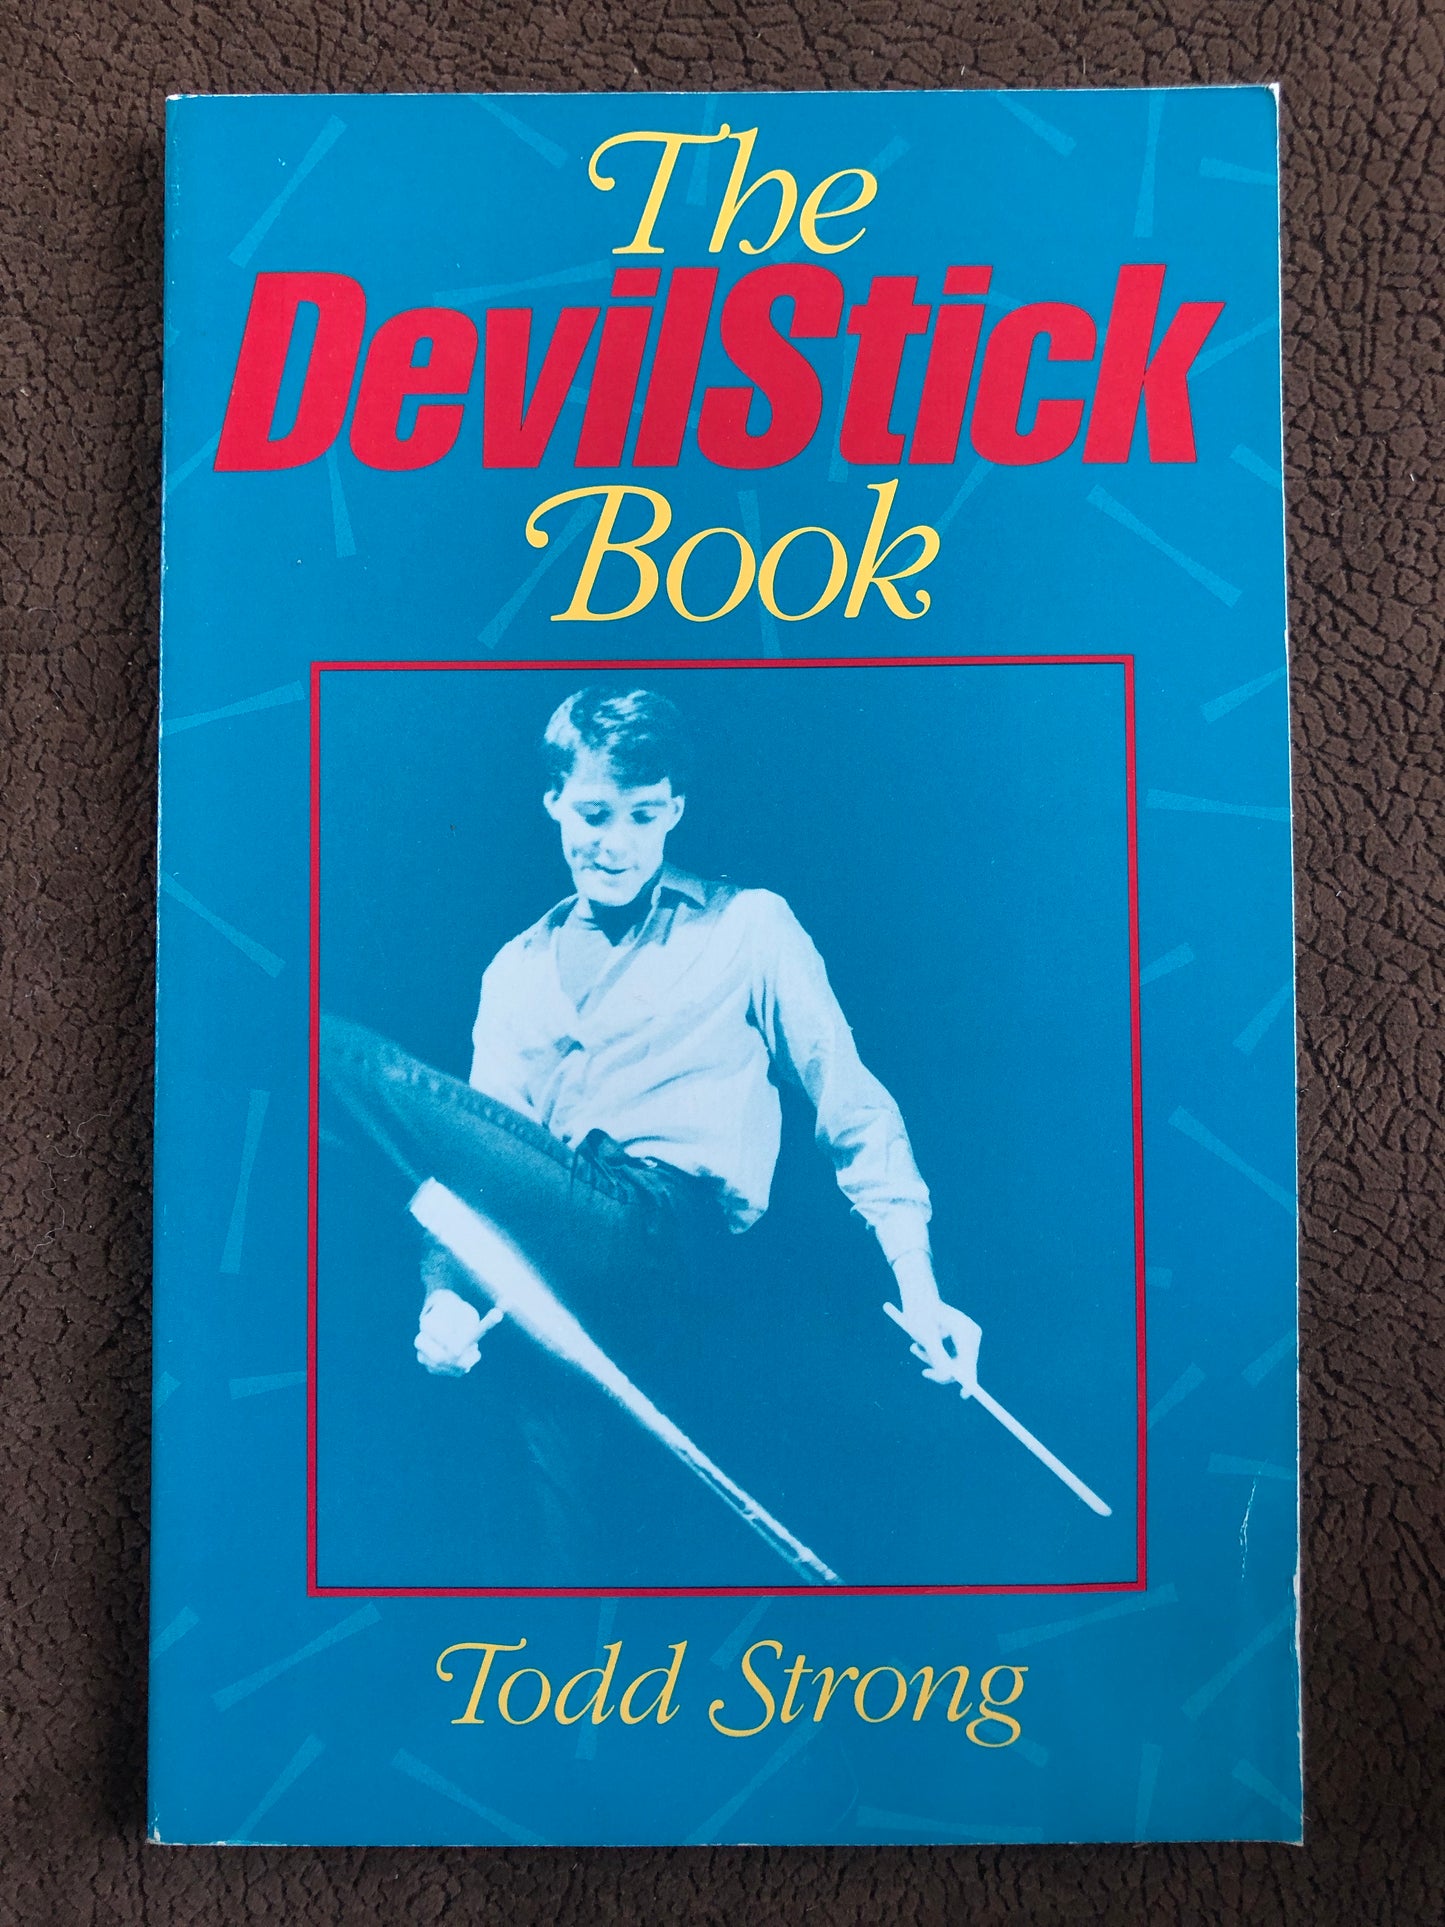 The Devil Stick Book - Todd Strong